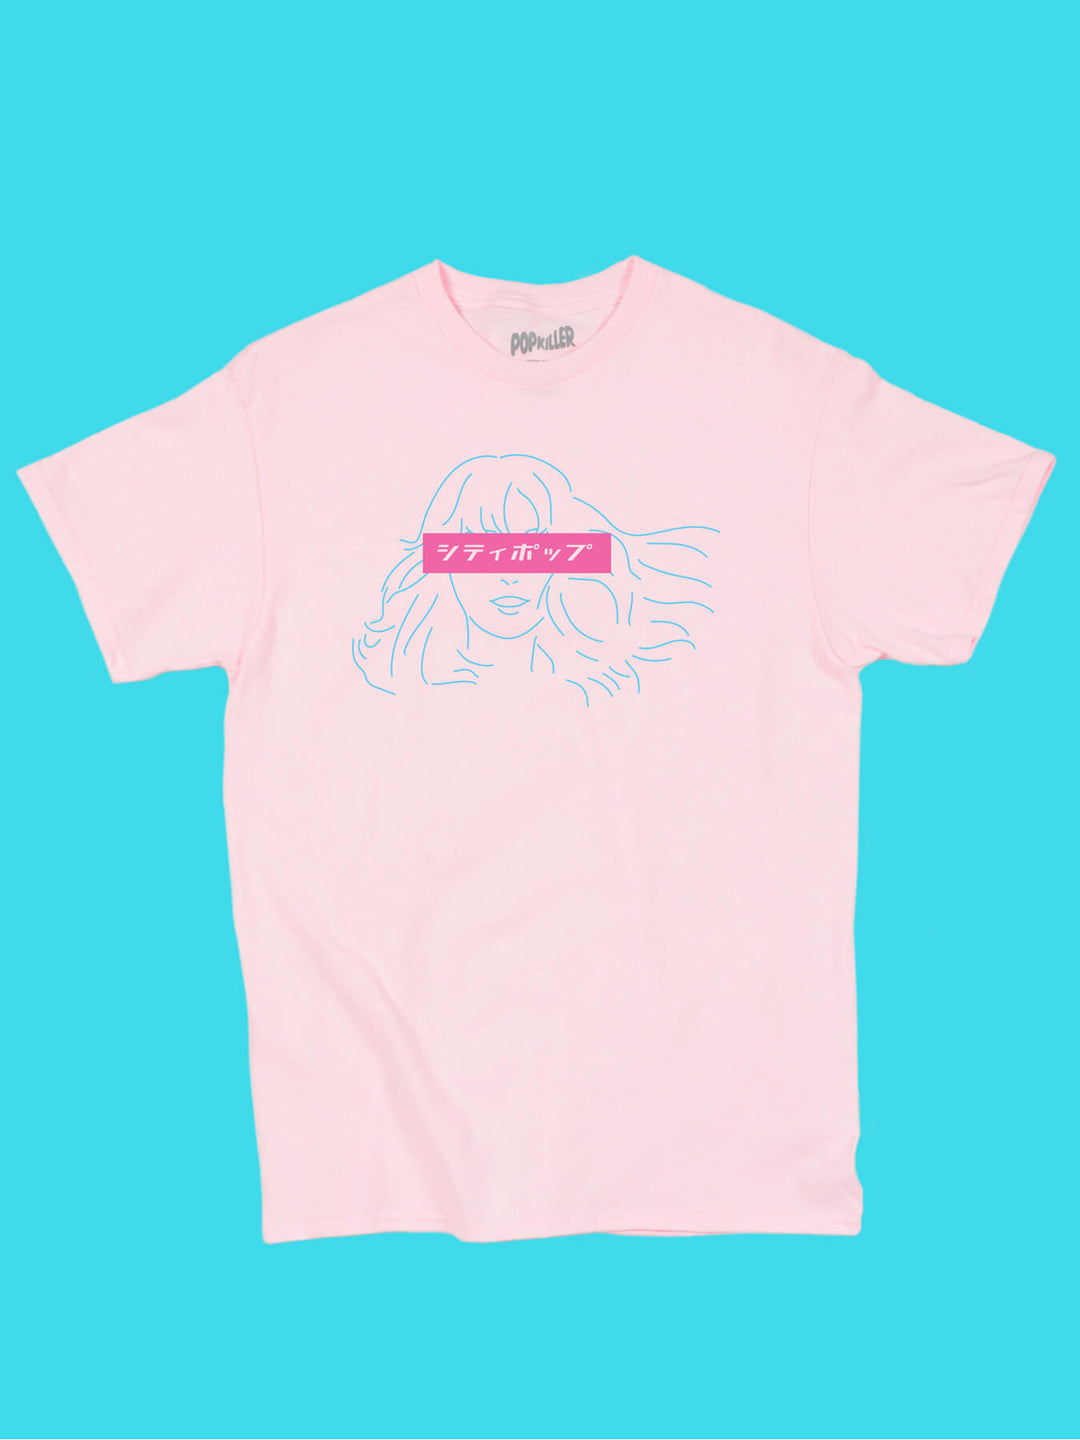 A pink graphic tee with an illustration of Plastic Love Mariya Takeuchi on it.